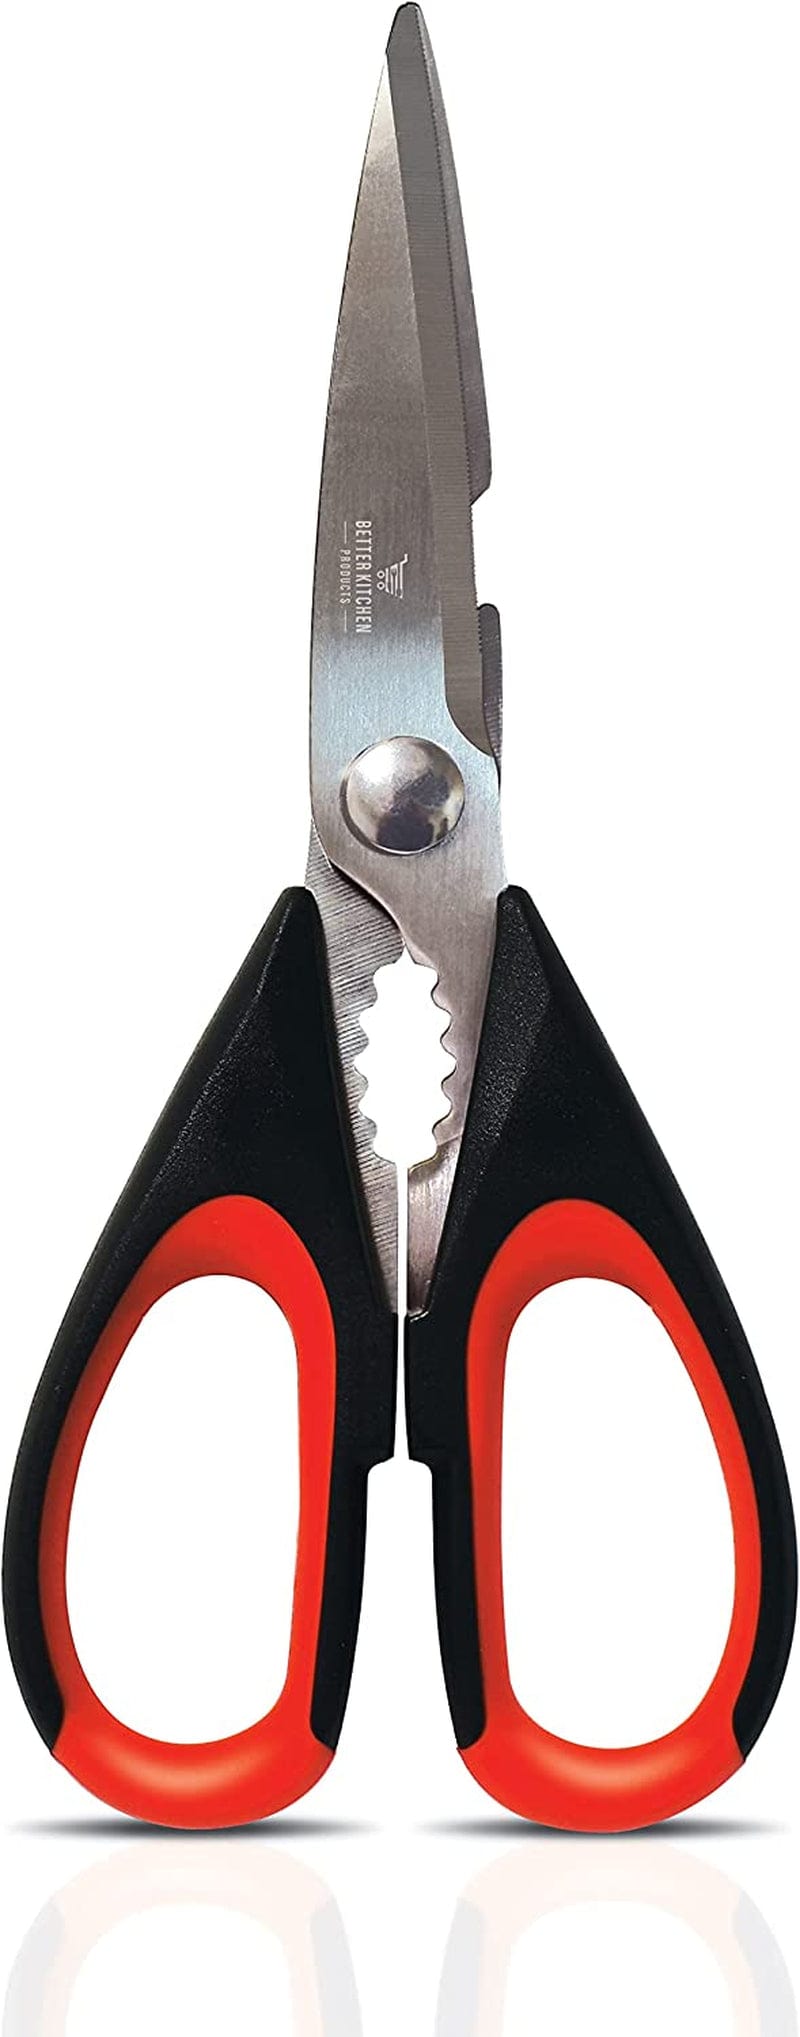 Premium Kitchen Shears by Better Kitchen Products, 8.5", All Purpose Stainless Steel Utility Scissors, Heavy Duty Scissors, Meat Scissors, Poultry Shears, Multipurpose (2Pk-Blk/Gray & Slvr/Blu) Home & Garden > Kitchen & Dining > Kitchen Tools & Utensils Better Kitchen Products 1PK-Black/Red  